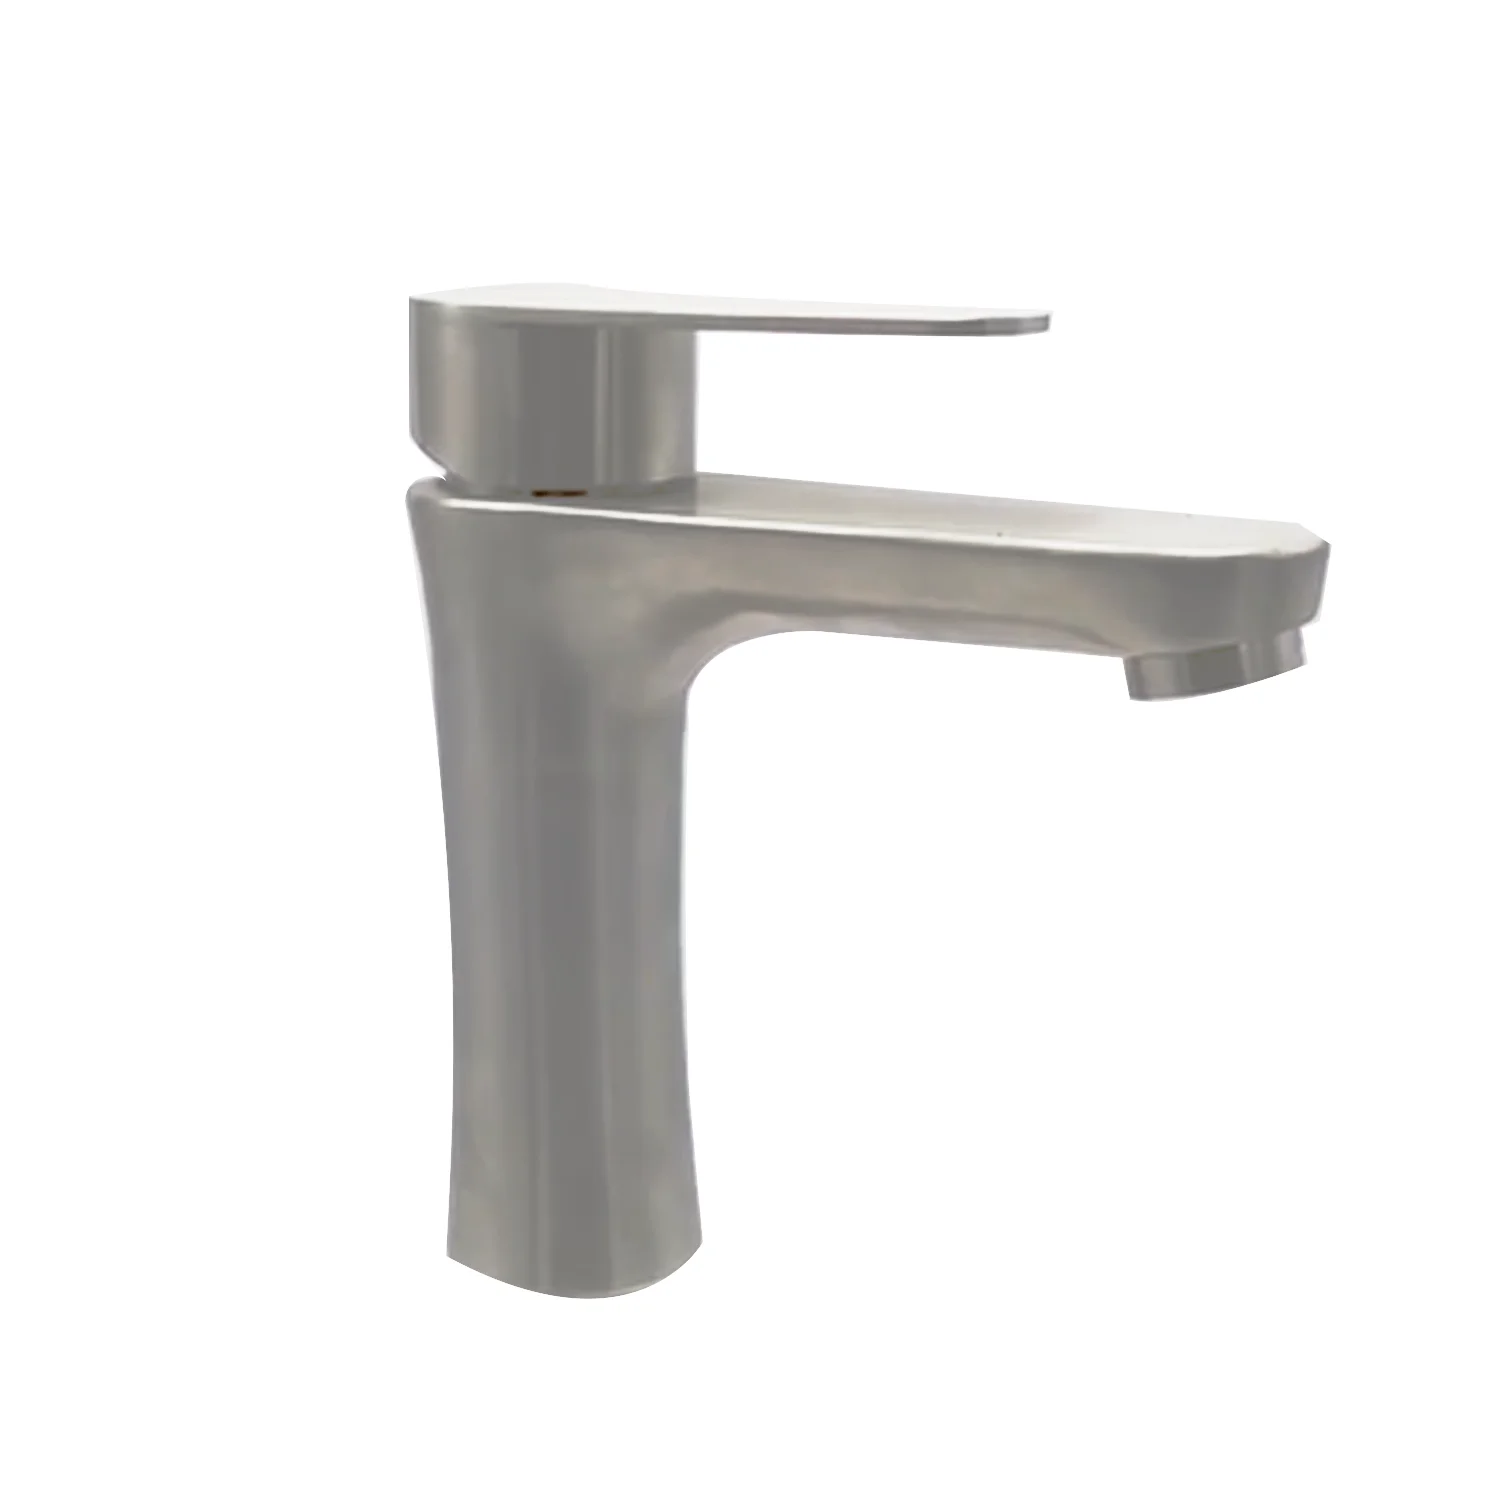 
New design best selling urban single handle waterfall hot cold mixer bathroom lavatory basin faucet from china 